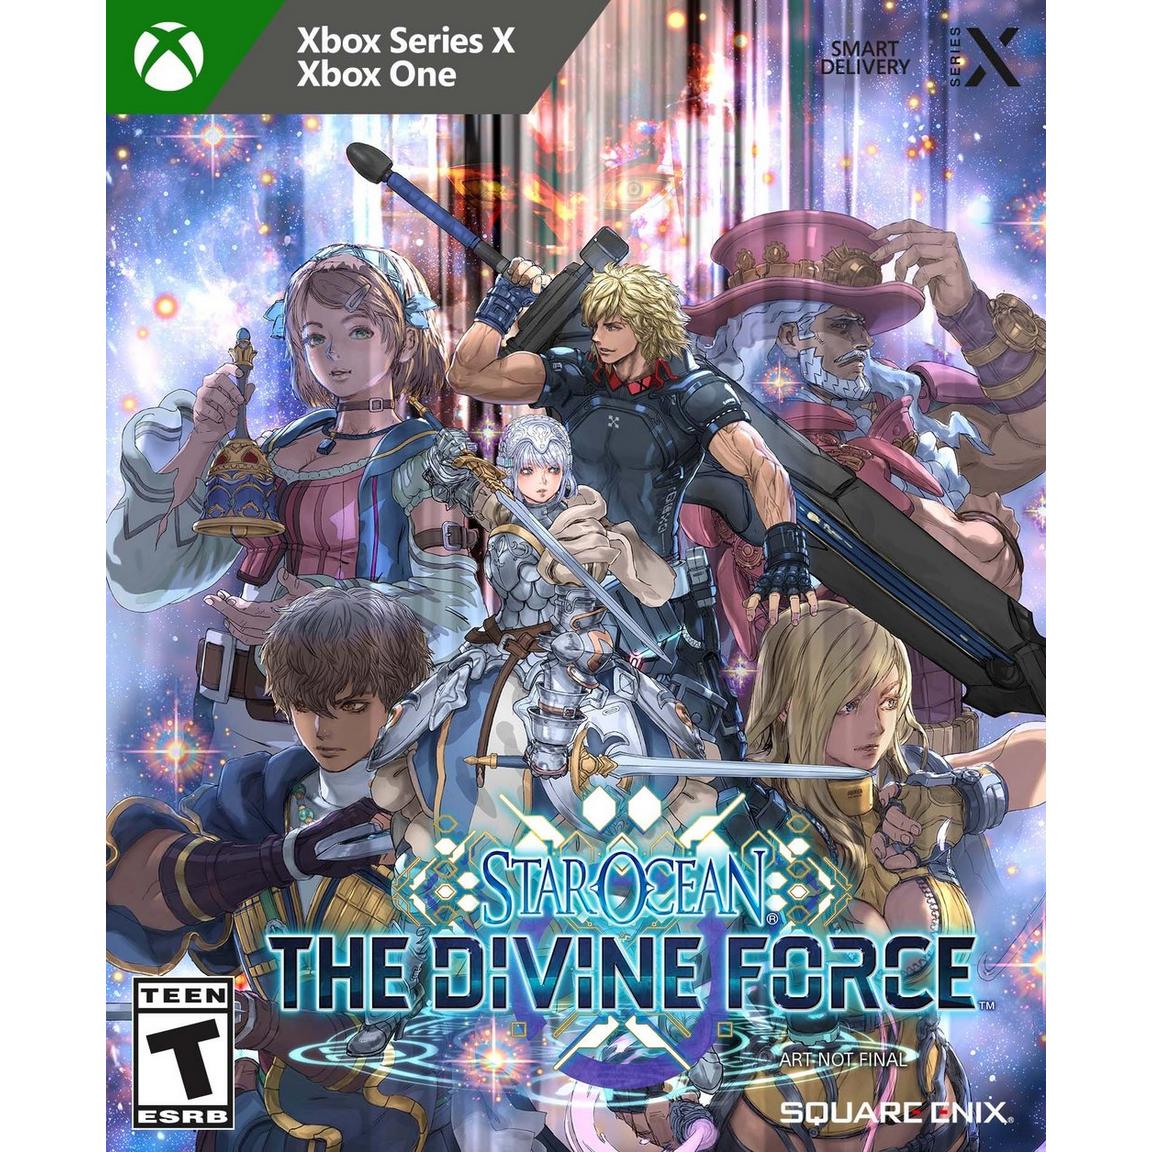 Star Ocean: The Divine Force (Xbox One/Series X) $10